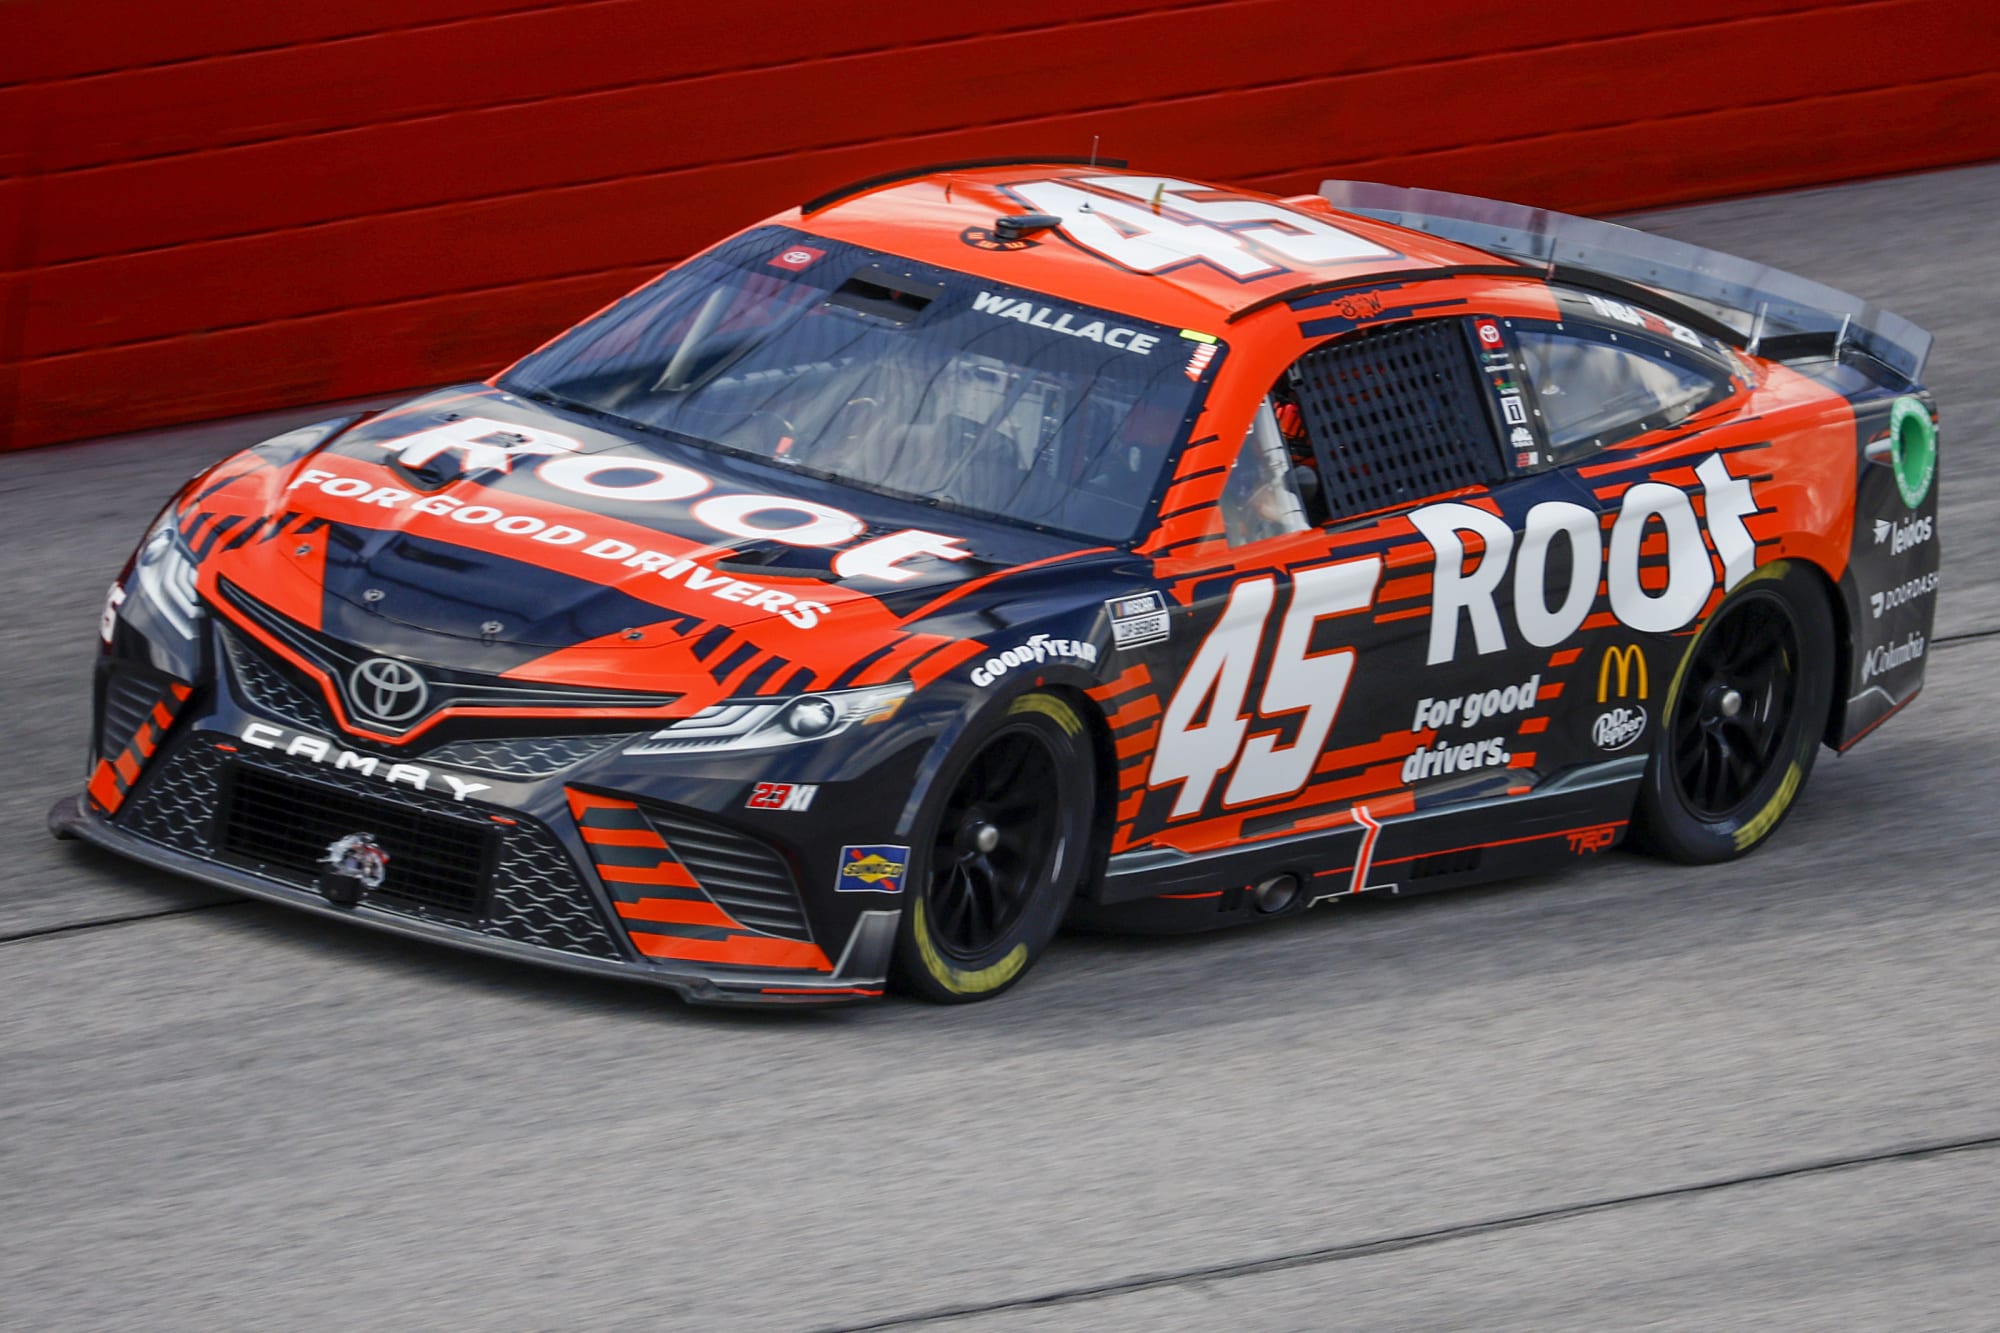 NASCAR 23XI Racing have a completely new driver lineup